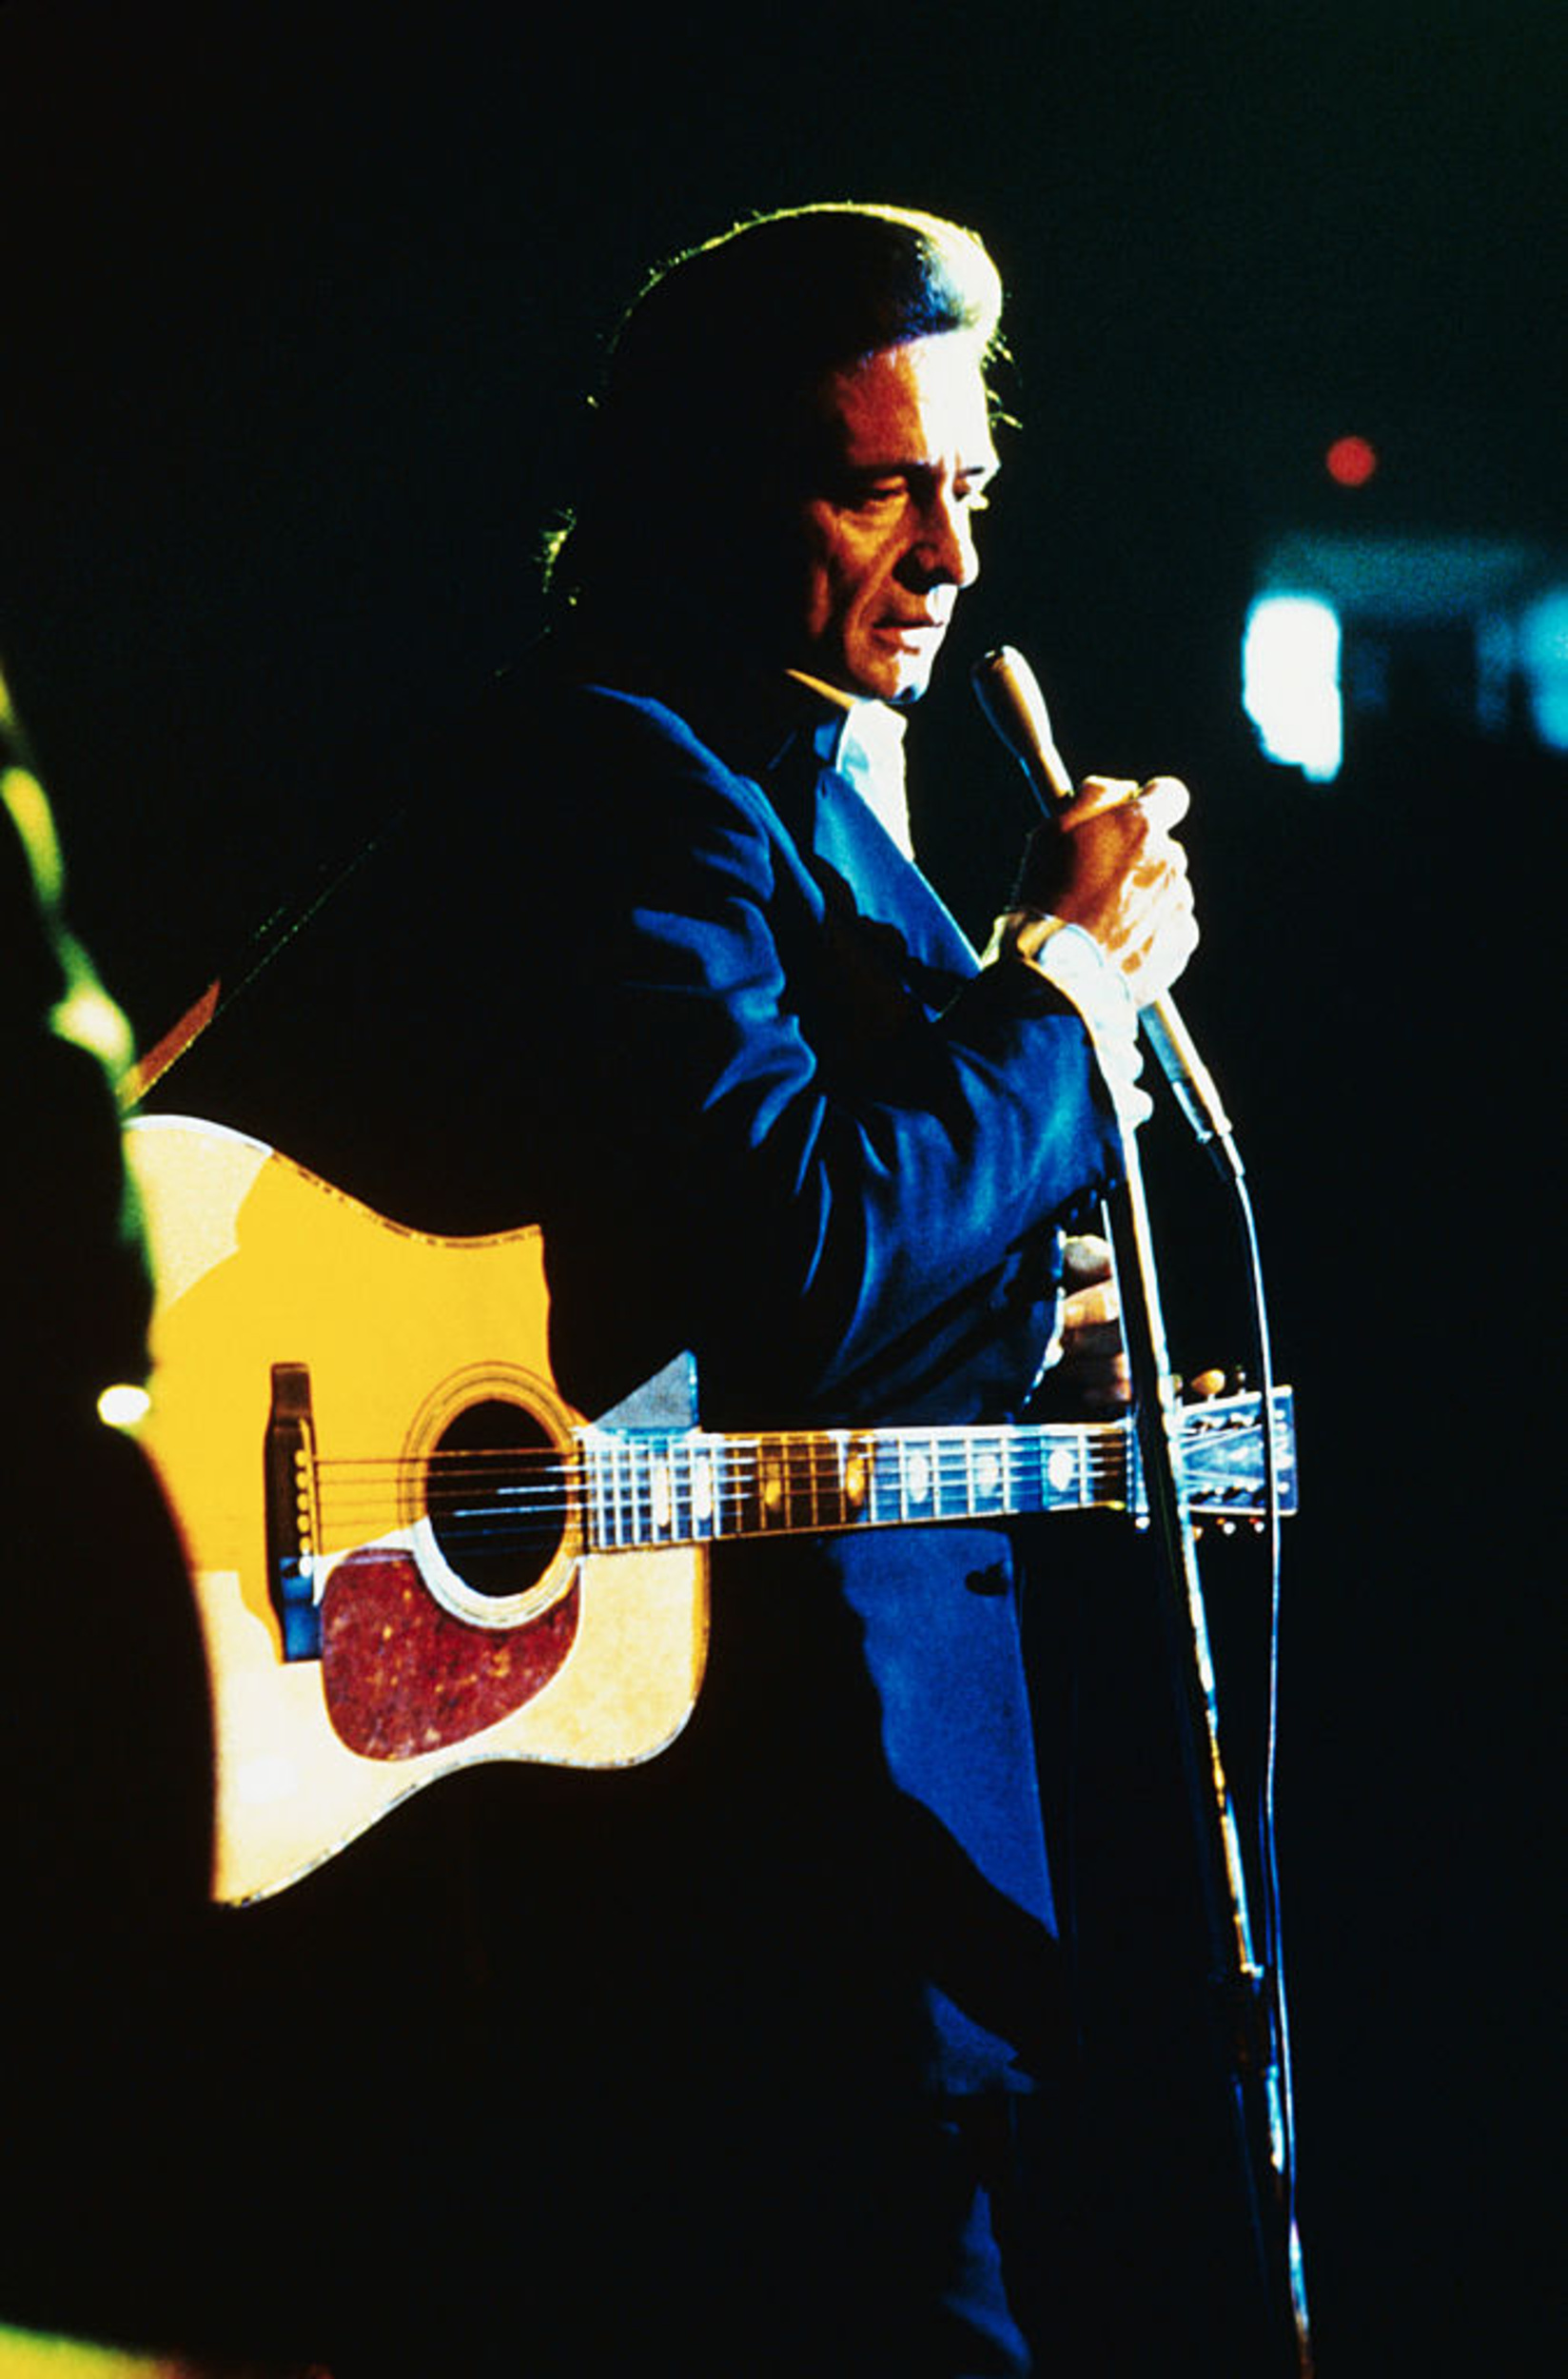 <p>Johnny Cash lists off too many American destinations to count in "I've Been Everywhere," making it an obvious addition to the soundtrack for a great American road trip. Even if you're not going to Dayton, Ohio or Tulsa, Oklahoma, the appeal of this song is totally universal. </p><p>You may also like: <a href='https://www.yardbarker.com/entertainment/articles/20_unforgettable_moments_in_live_television_history_010324/s1__35260103'>20 unforgettable moments in live television history</a></p>